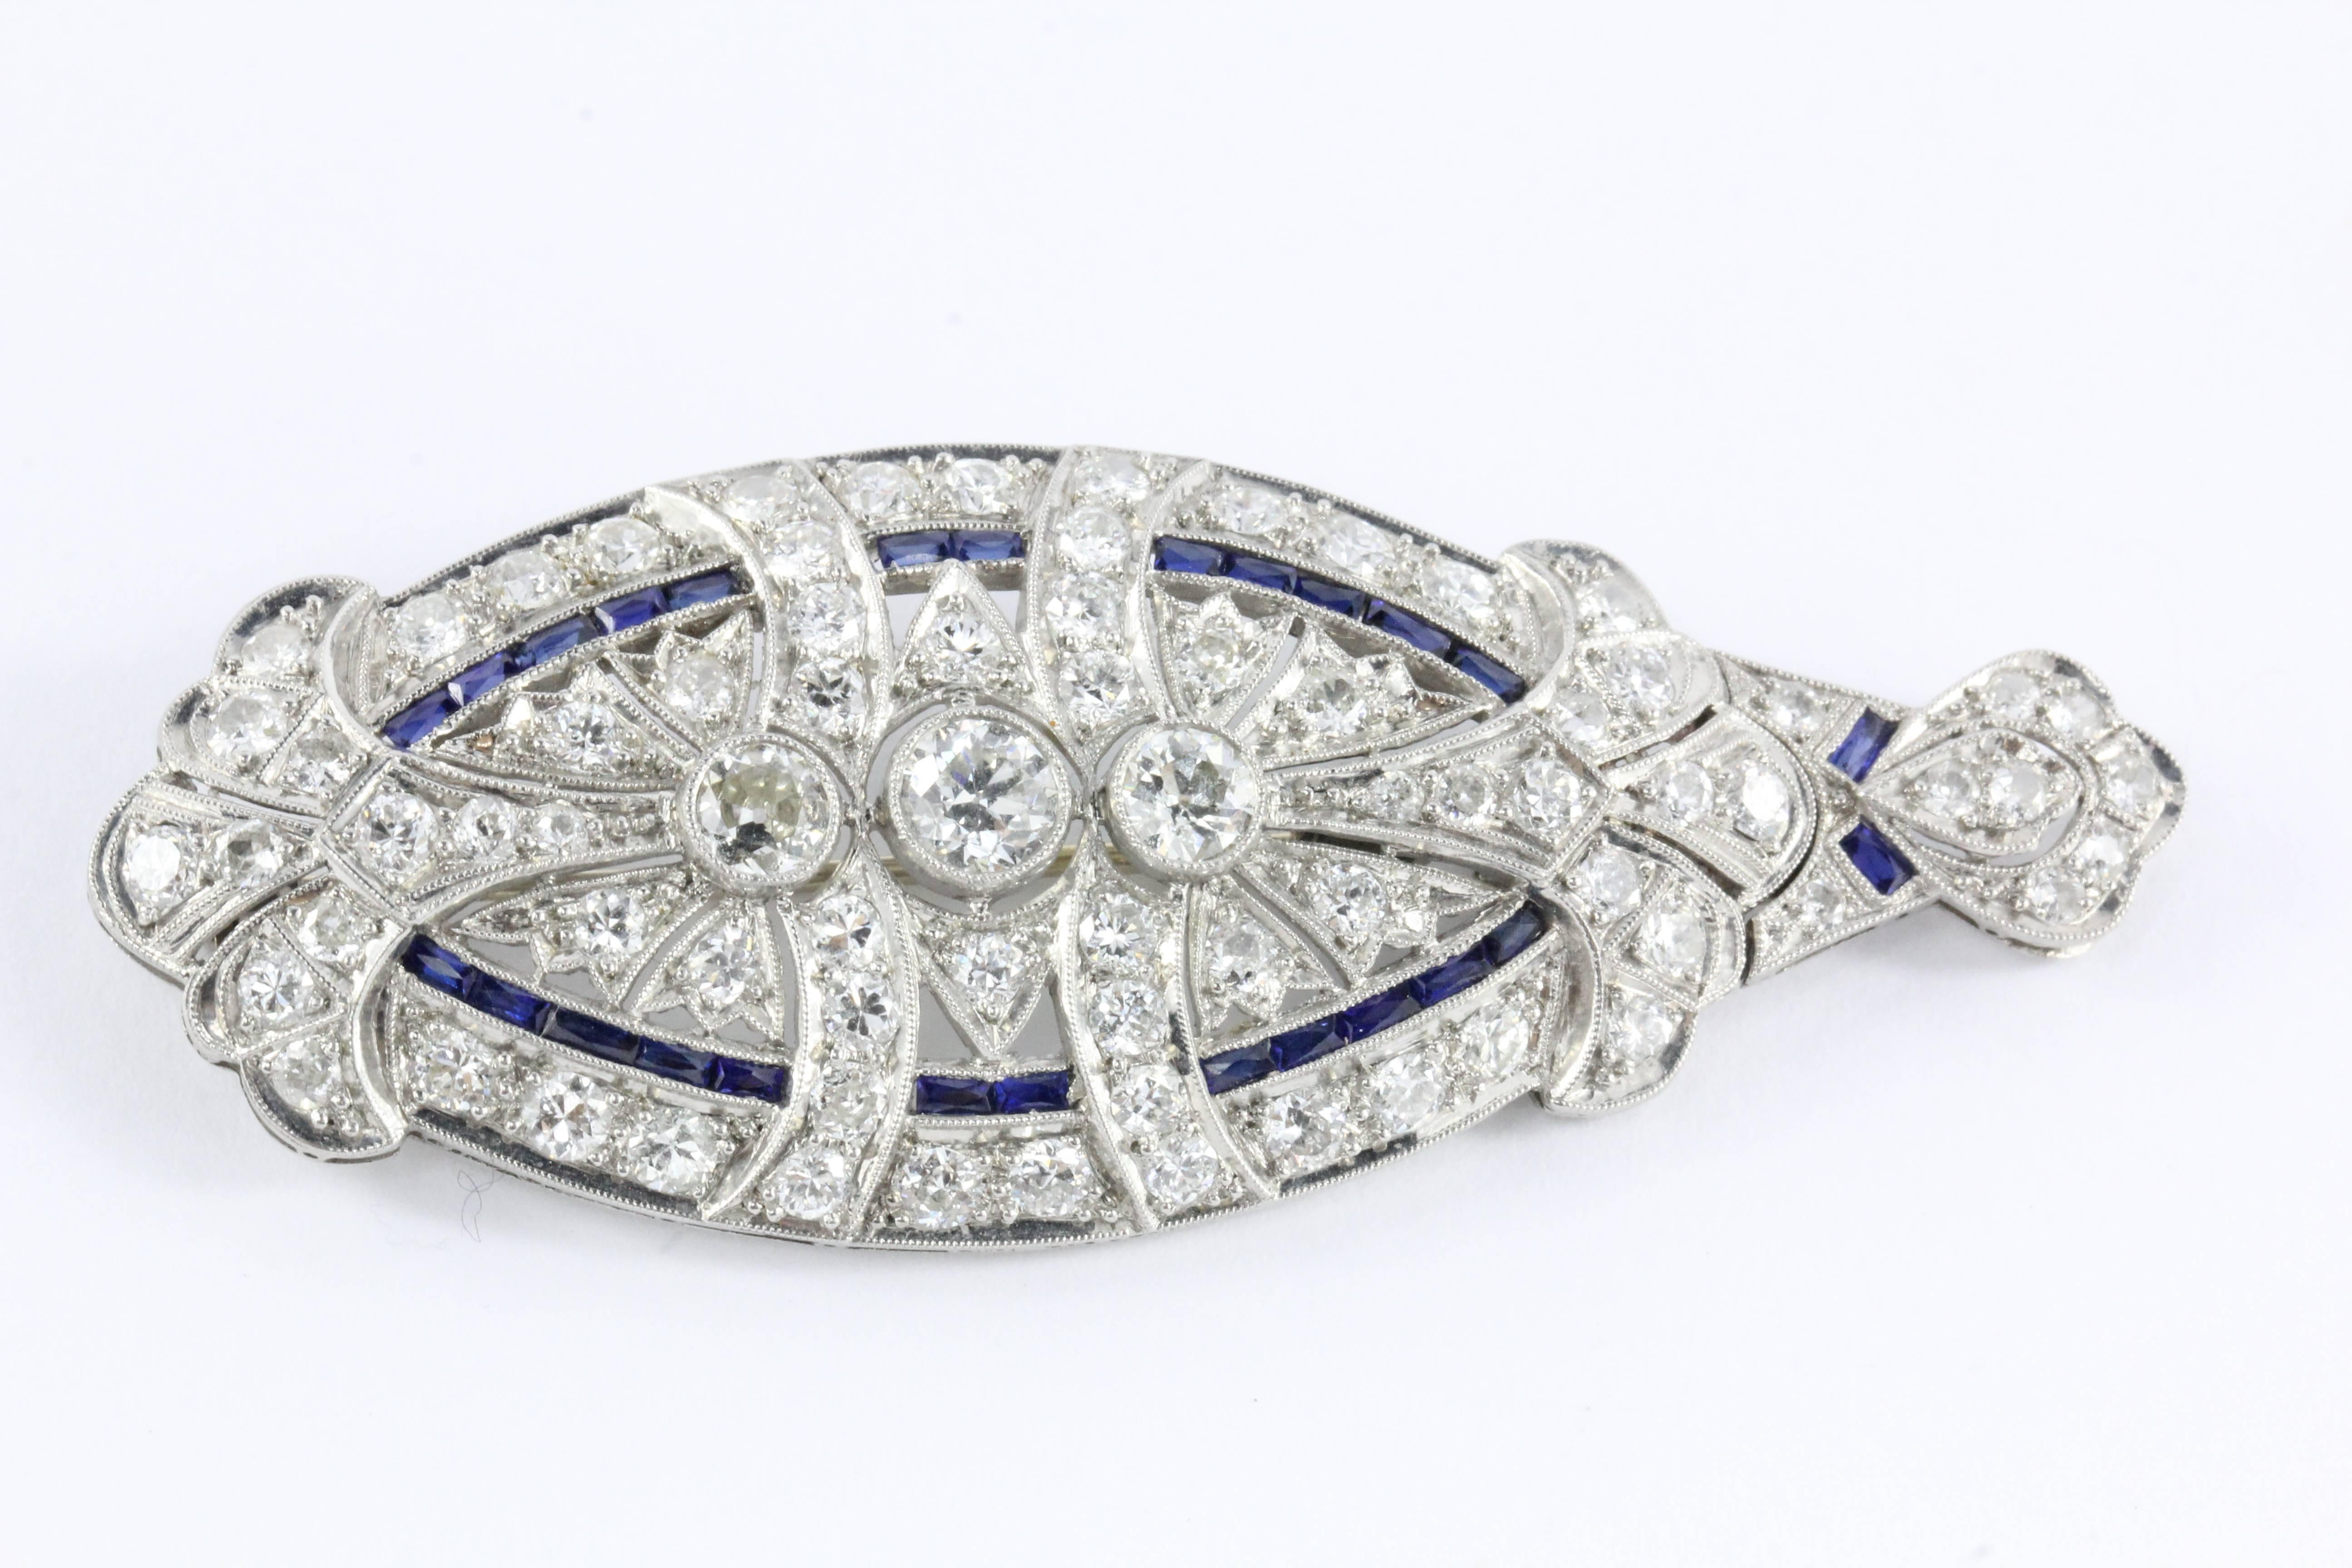 A gorgeous Edwardian 5 carat total weight diamond sapphire platinum brooch. The piece can be converted from a pendant to a brooch with a fine crafted detachable screw located on the bale. The center stone is a .5 carat old European cut I color VVS2